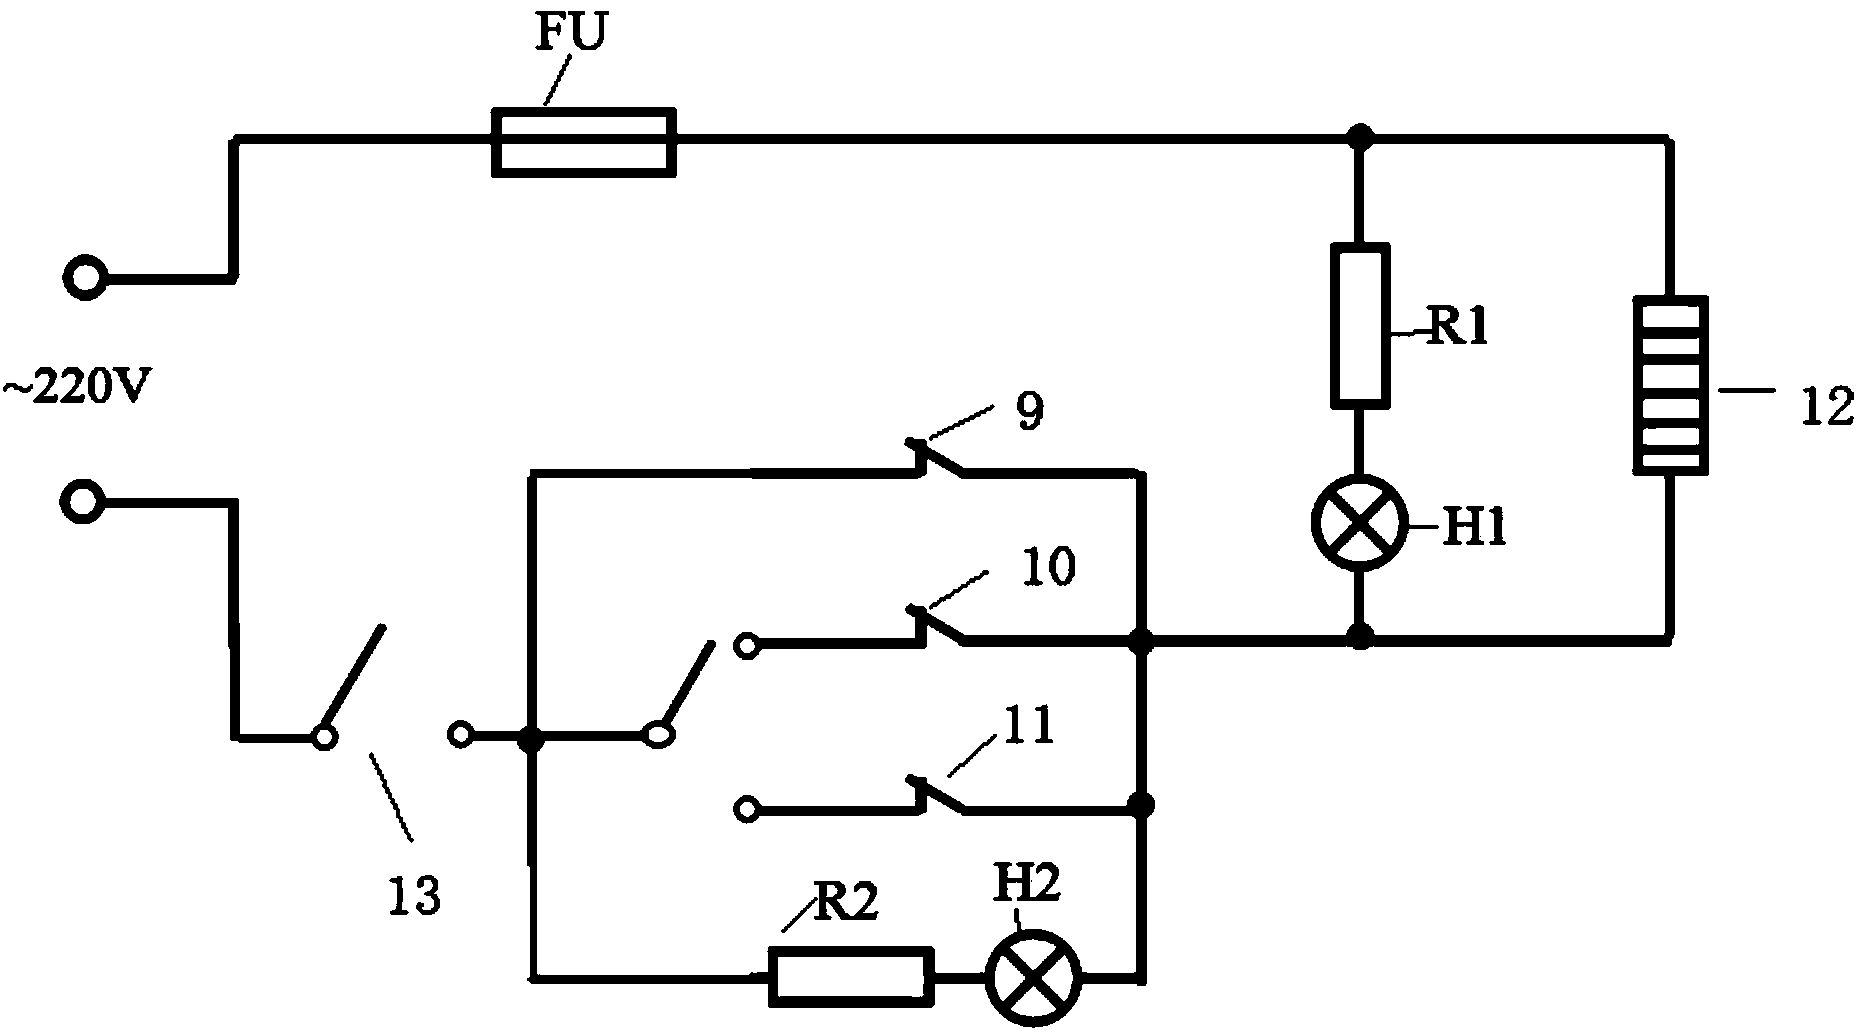 Temperature control unit based on shape memory alloy